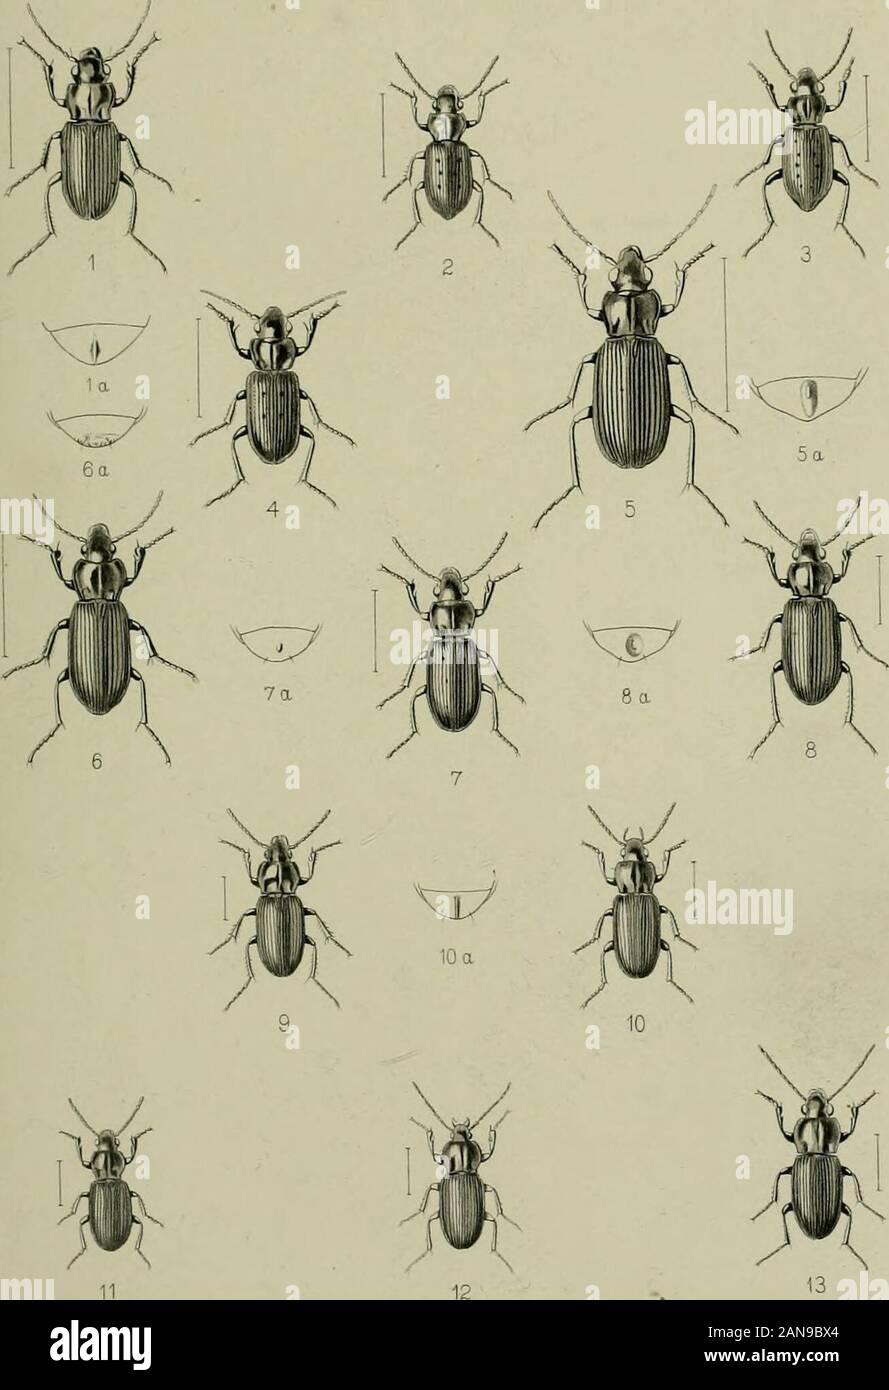 The Coleoptera of the British islandsA descriptive account of the families, genera, and species indigenous to Great Britain and Ireland, with notes as to localities, habitats, etc . THE CAMBTllOGE aClfVilFlC IVSTHUVENI COMPANr. L.REEVt iCO LONDON. PLATE XI. Fig. 1. rtcrosticlins i)aniuipunctatns, Germ. 111. „ „ last ventral segment of abdomen of male. 2. „ oblongo-puuctatus, F. 3. „ vitreus, Dtj. 4. „ aterrimui, Payk. 5. ,, niger, Sdiall. 5a. „ „ last ventral segment of abdomen of male. 6. „ vulgaris, L. 6a. „ „ last ventral segment of ab- domen of male. 7. „ nigrita, F. 7a. „ ,, last ventral Stock Photo